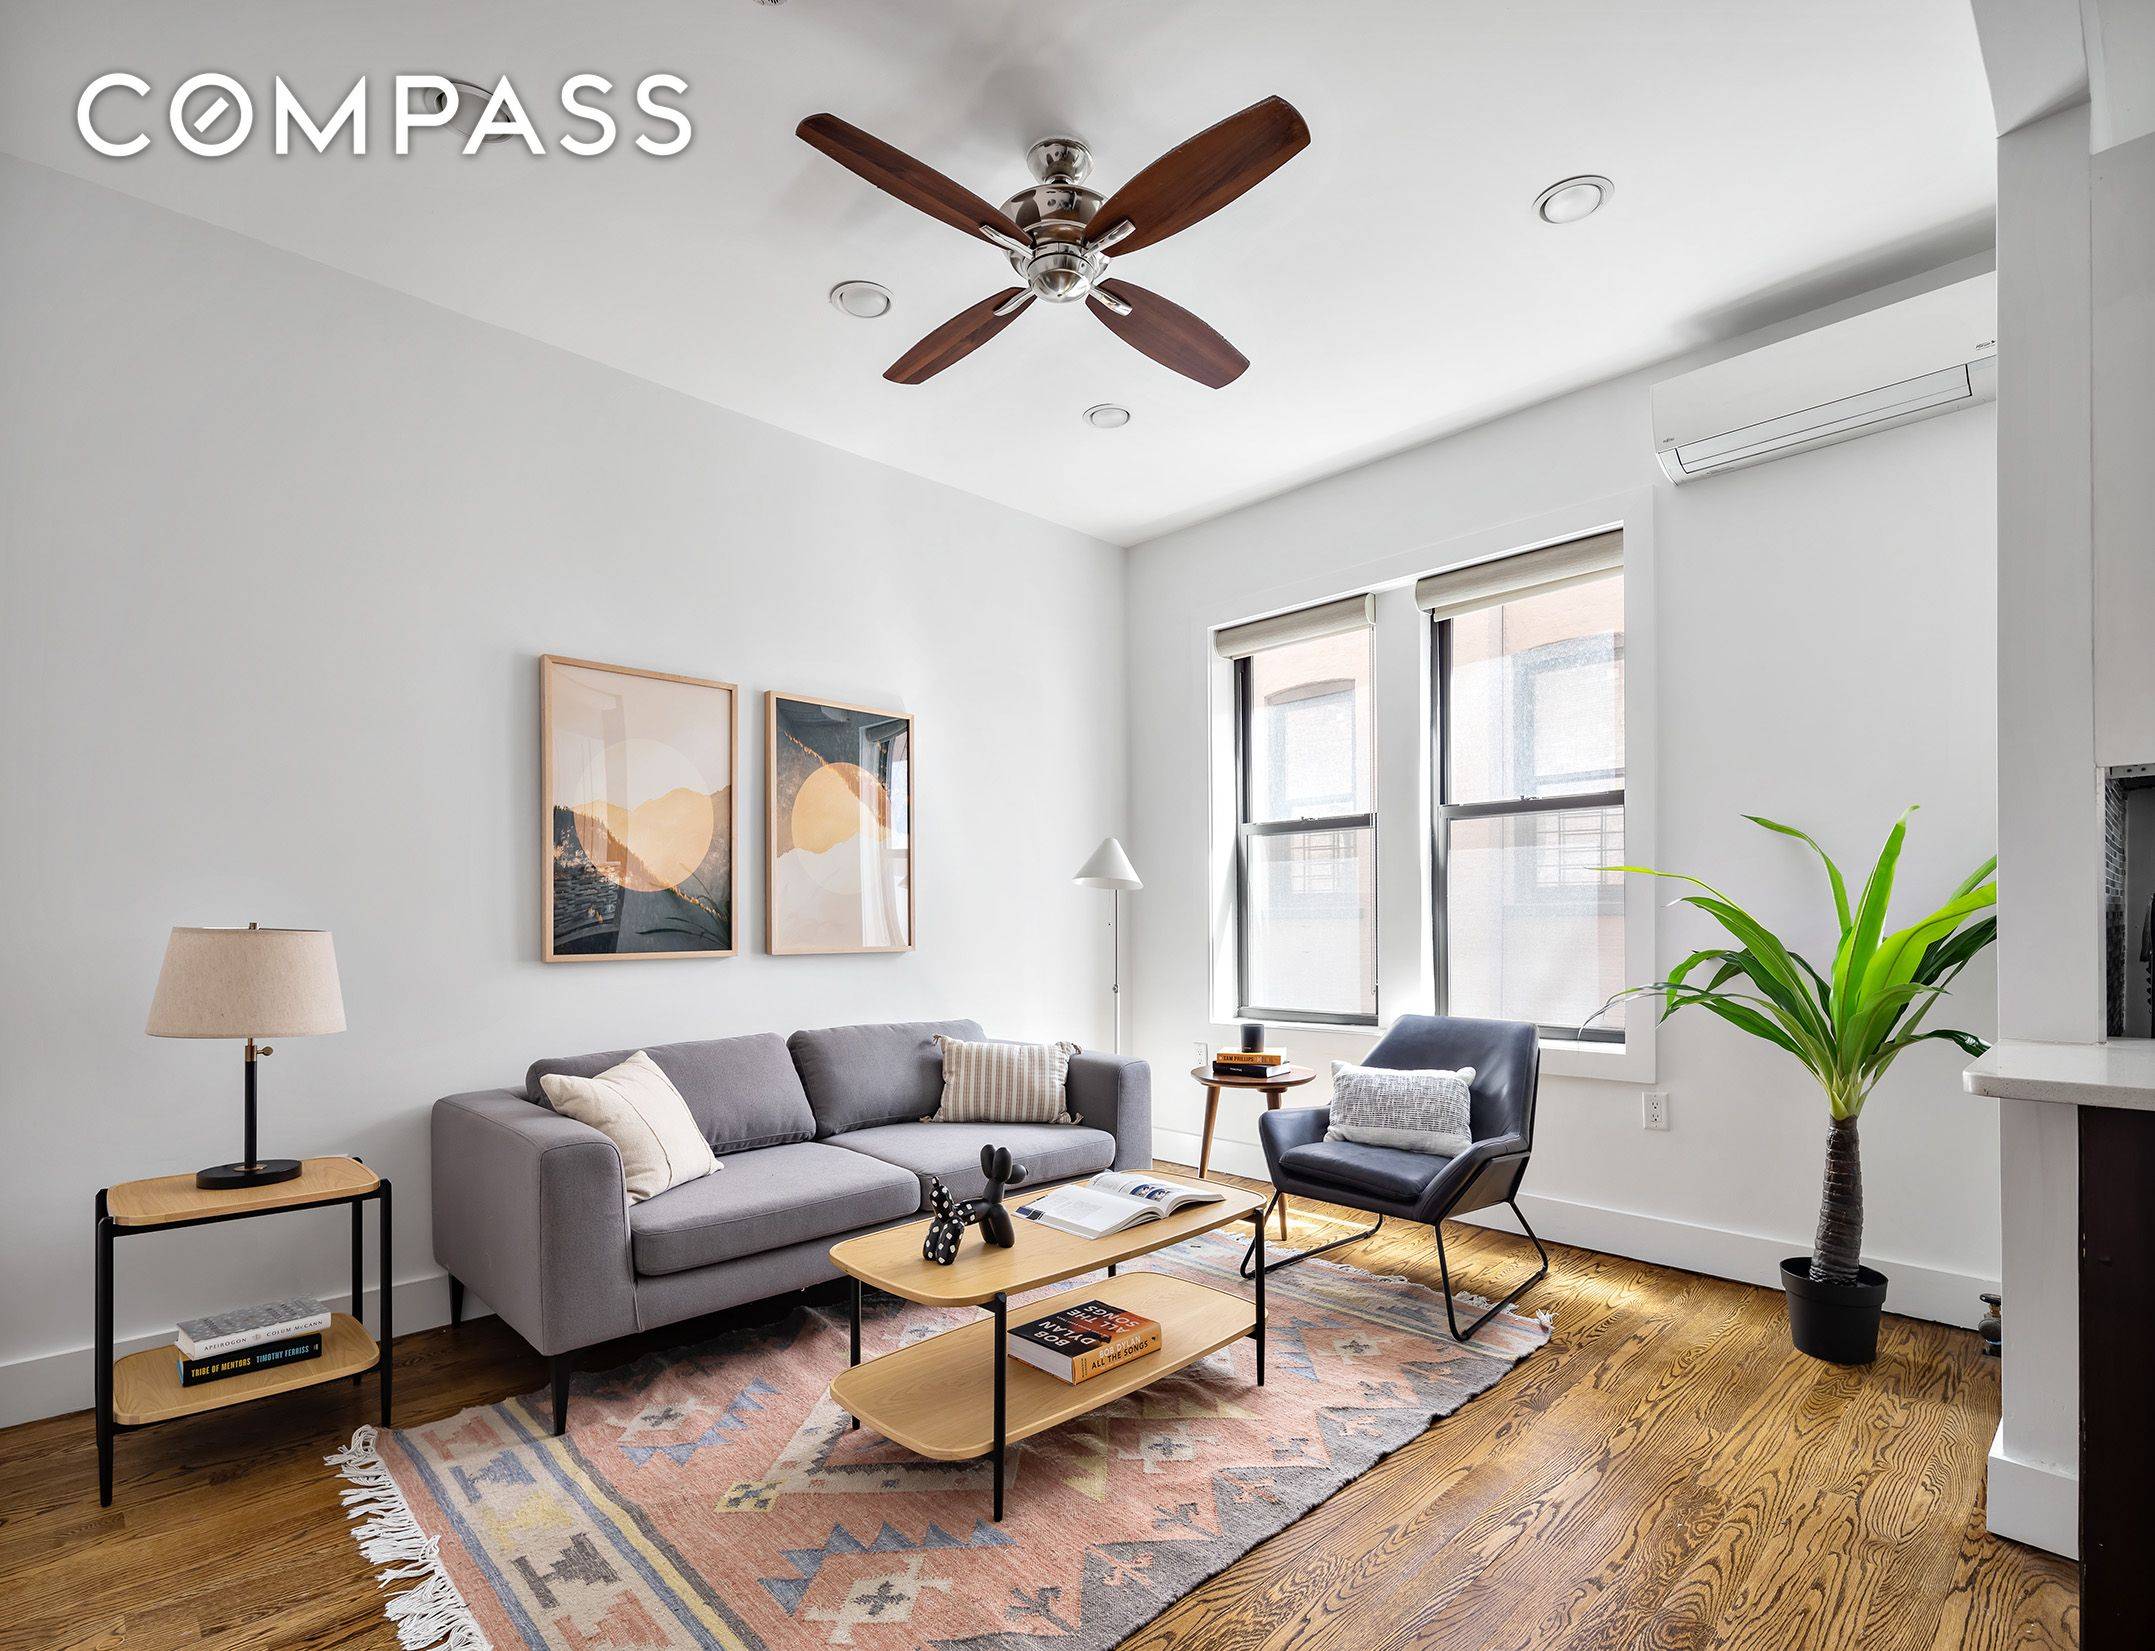 Moments from the Lakeside Center at Prospect Park, this one bedroom condo is perfectly positioned in Prospect Lefferts Gardens with a J 51 tax abatement through 2026.